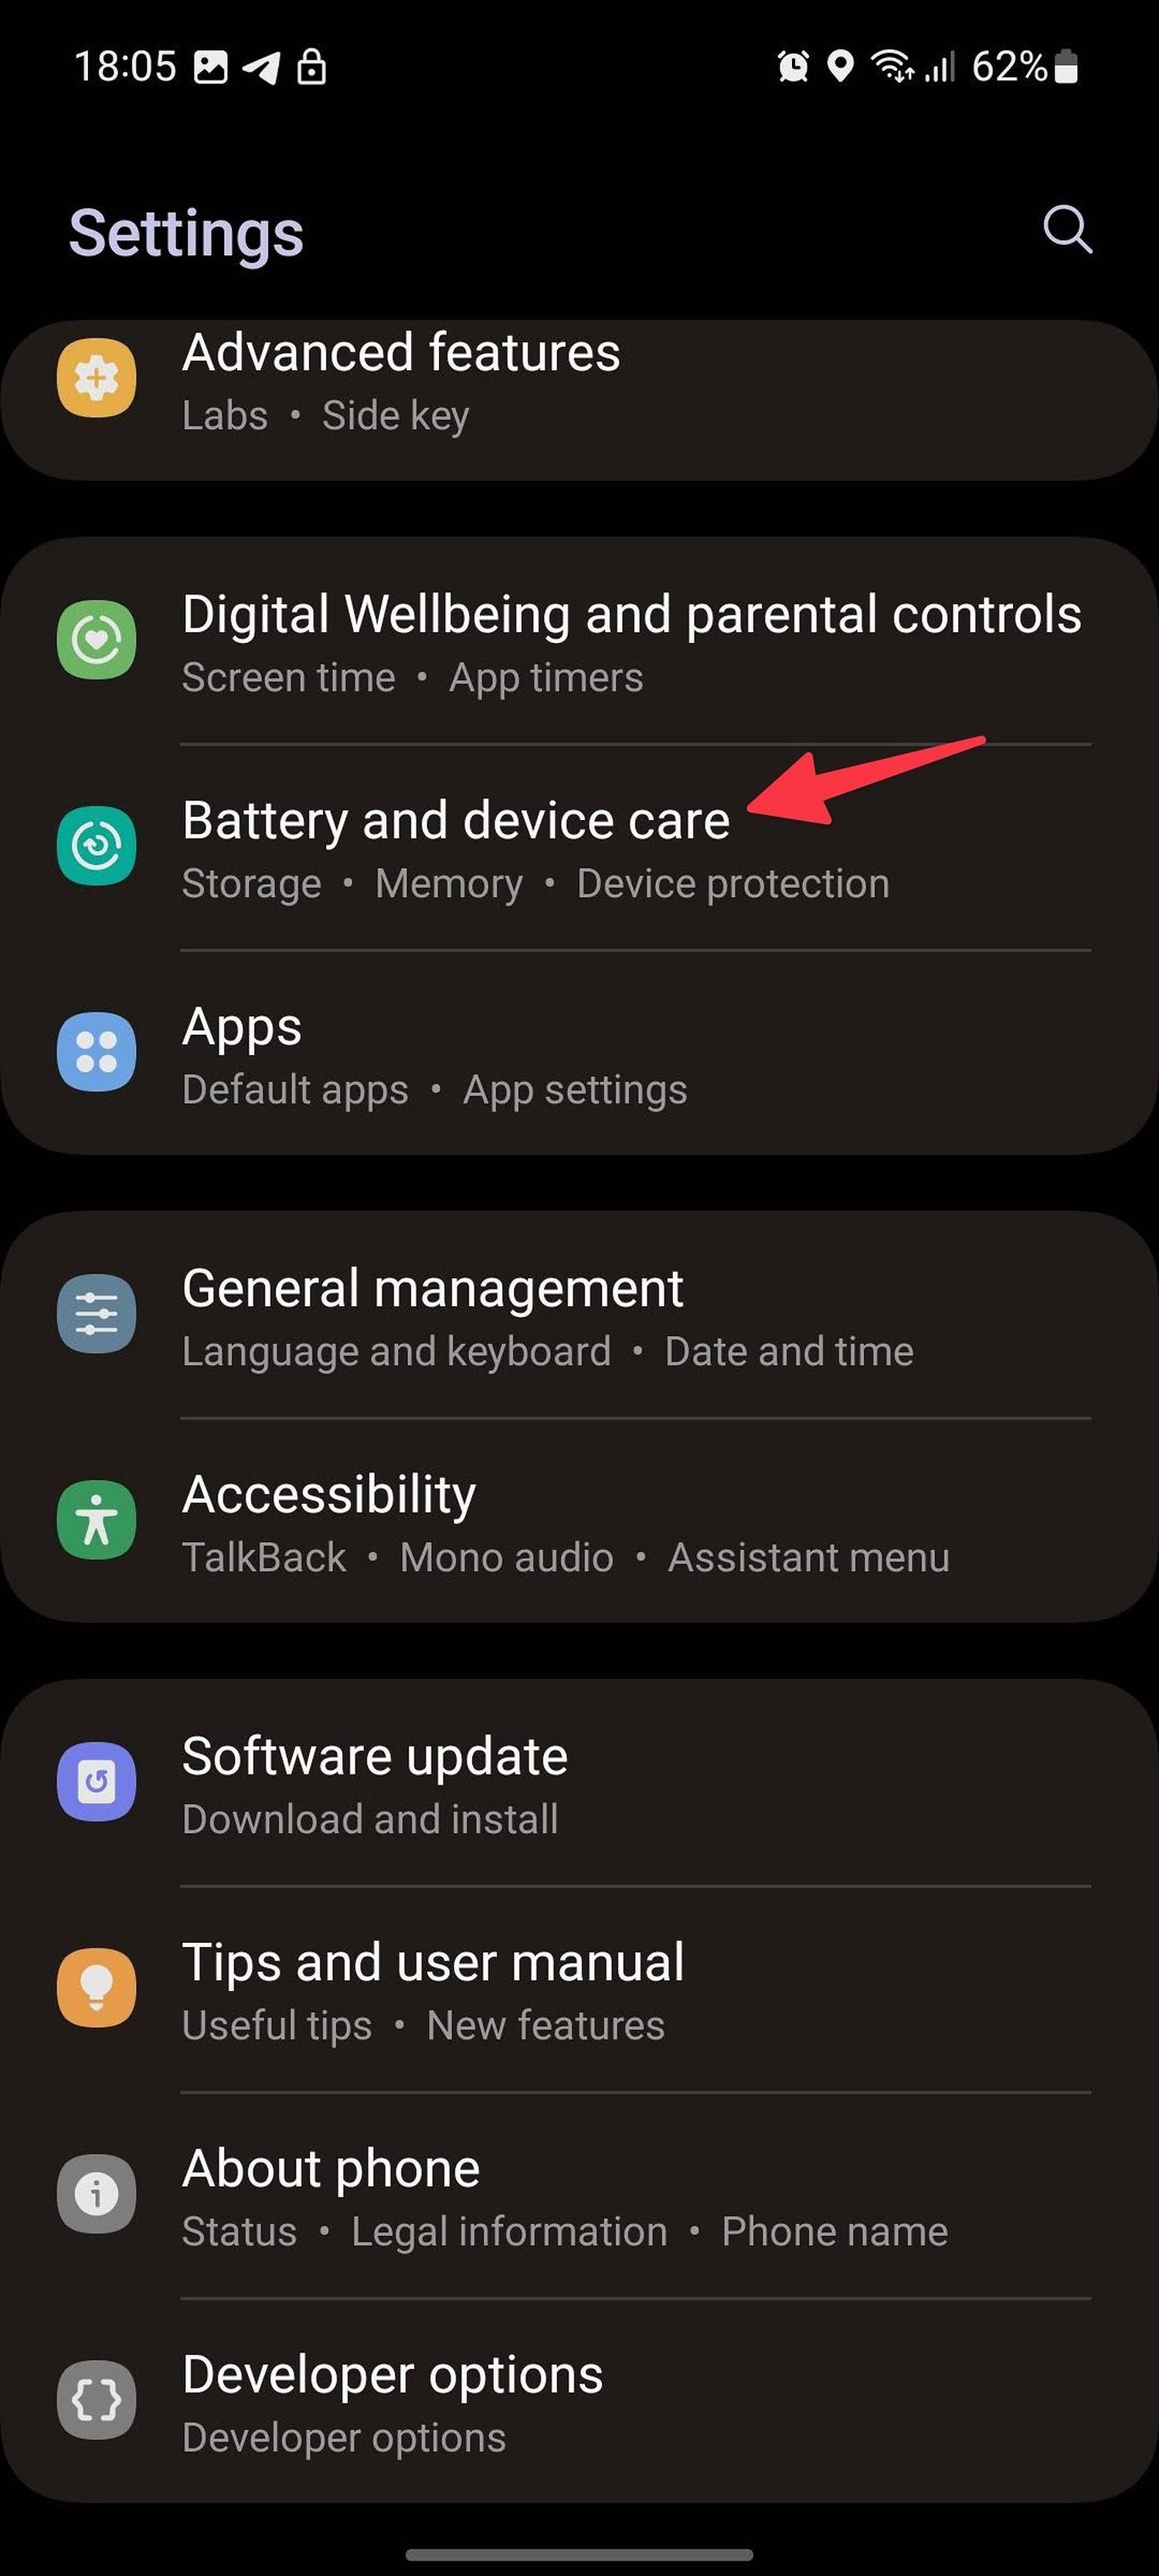 Battery and device care on Samsung phone